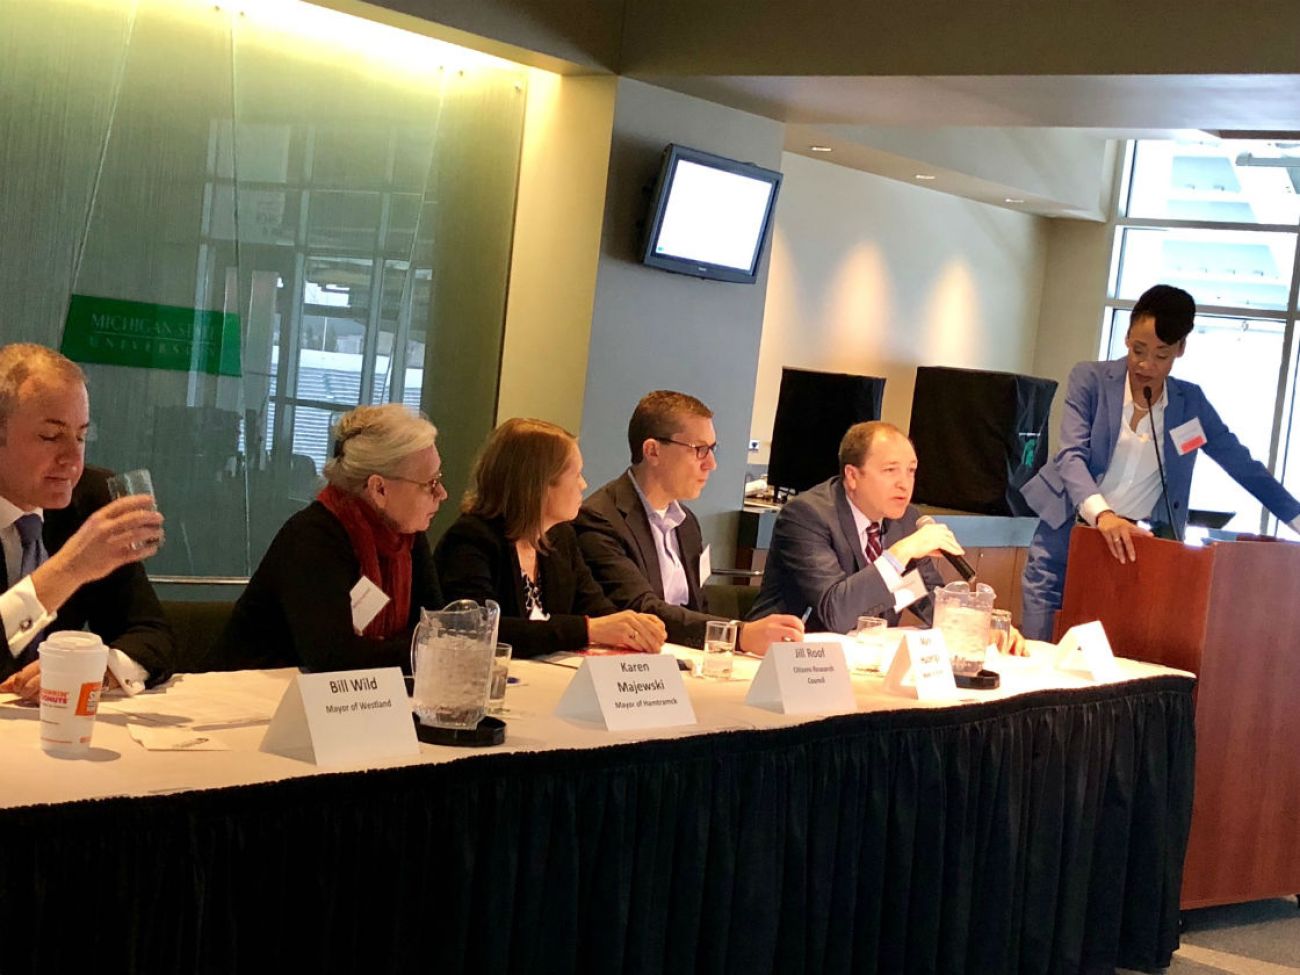 2018 Michigan Solutions Summit on Good Government thriving cities panel